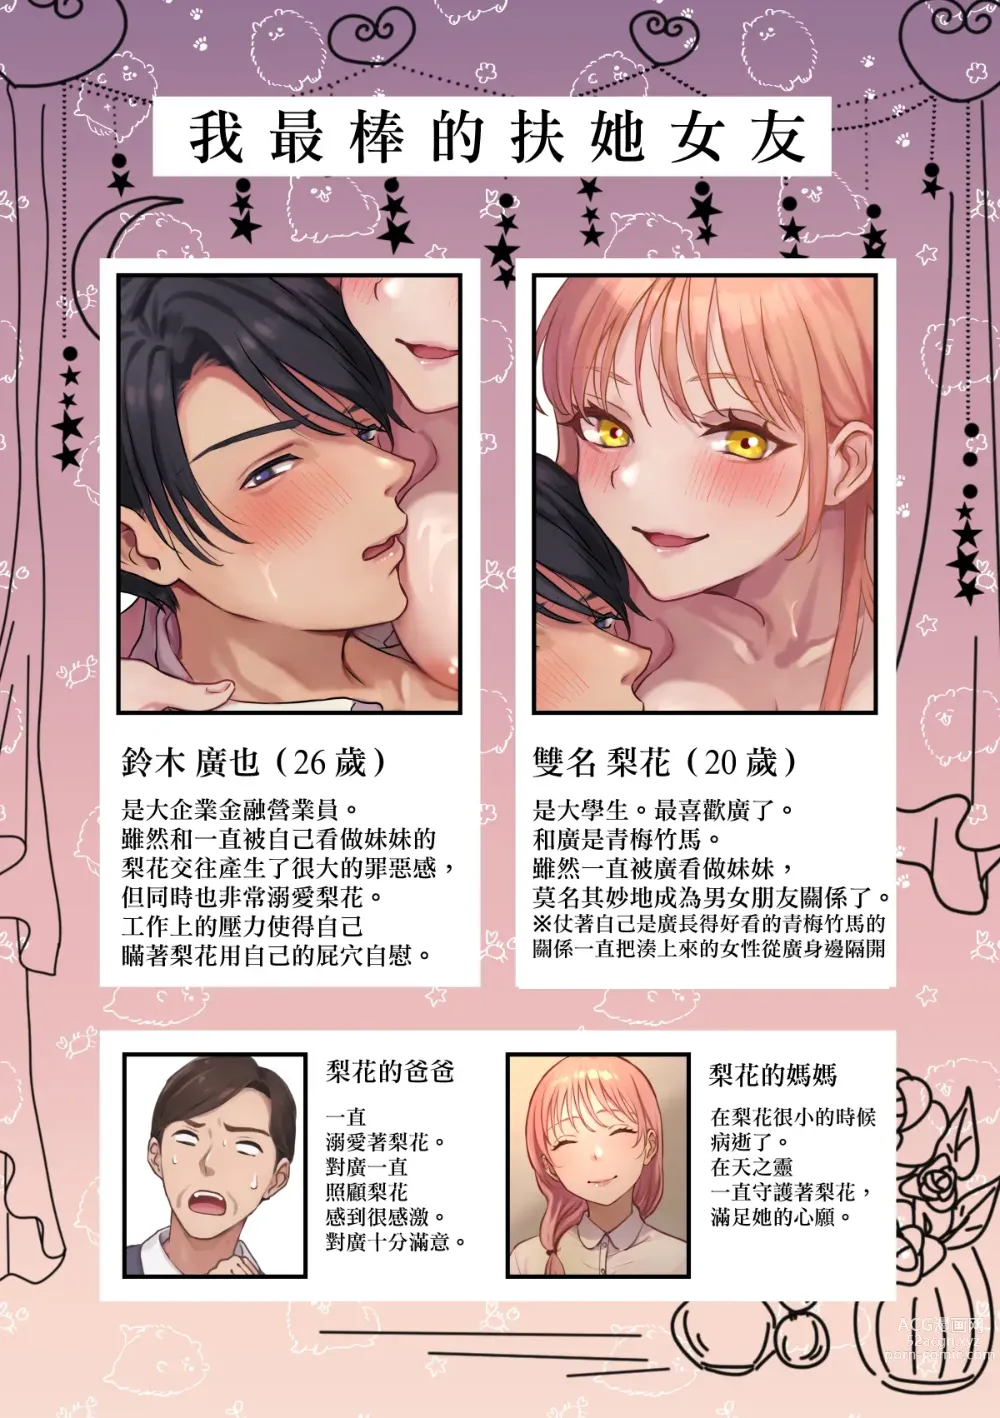 Page 2 of doujinshi 我最棒的扶她女友